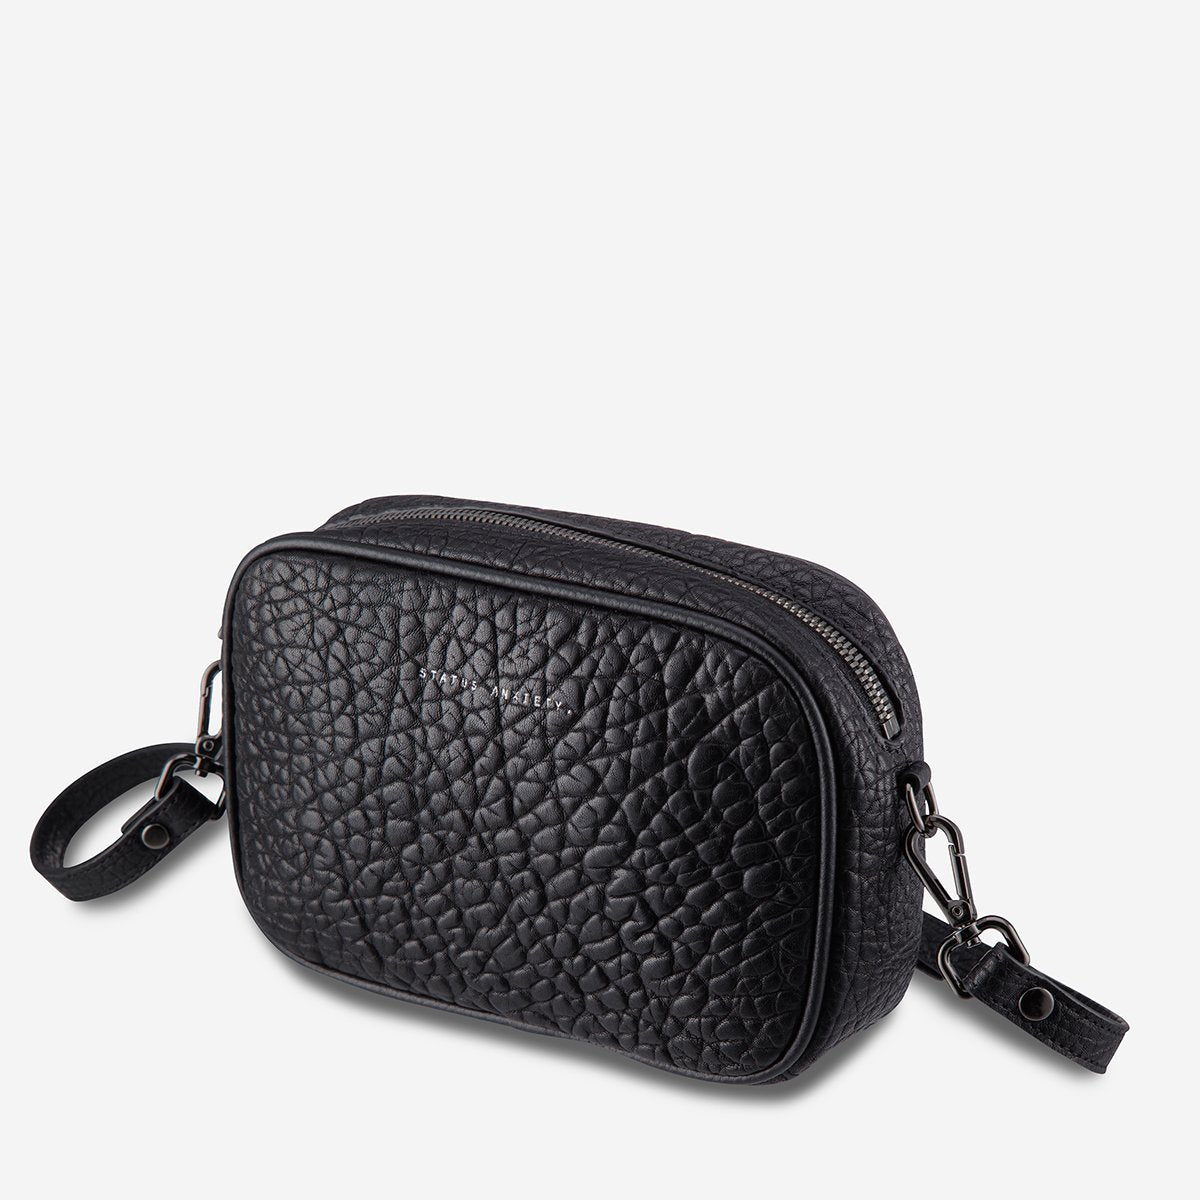 STATUS ANXIETY PLUNDER BAG BLACK BUBBLE